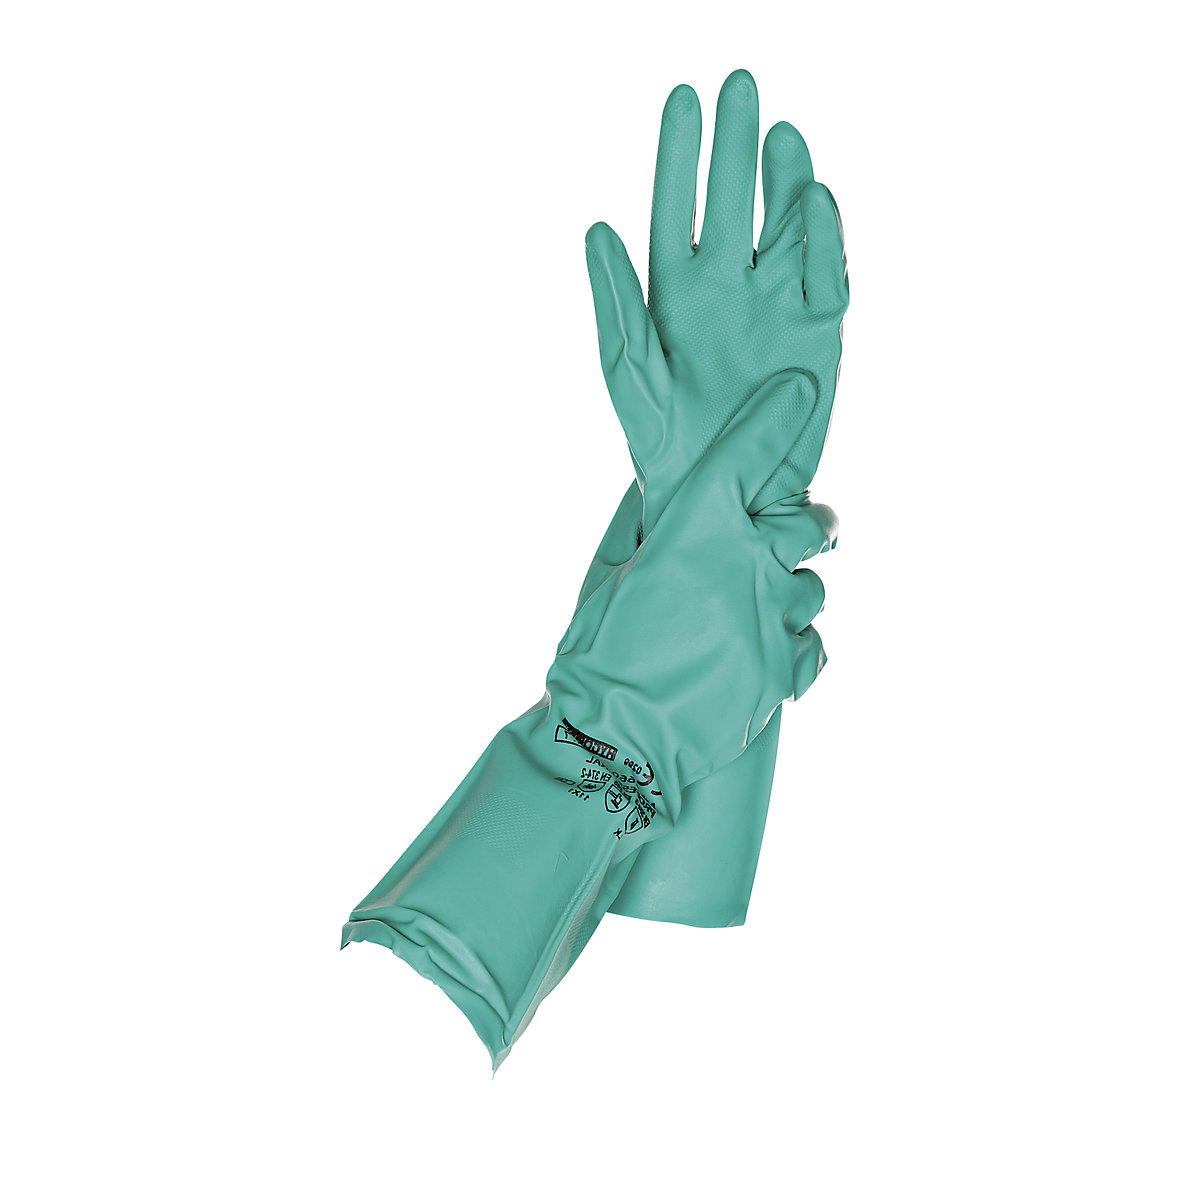 PROFESSIONAL chemical gloves